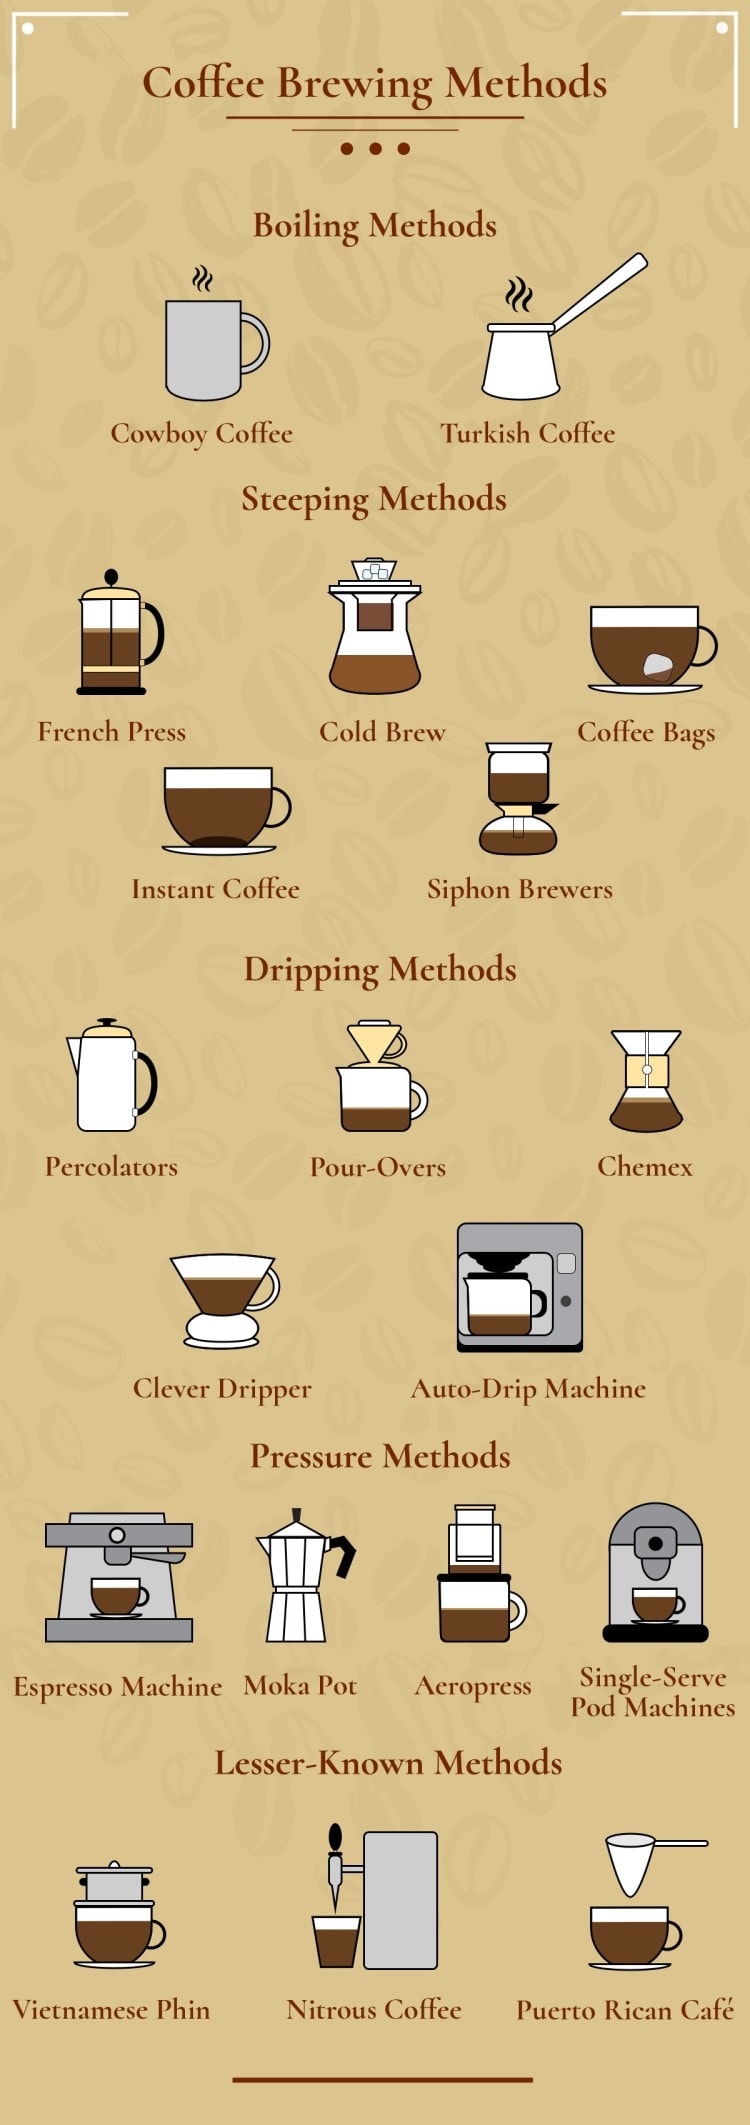 list of coffee brewing methods infographic